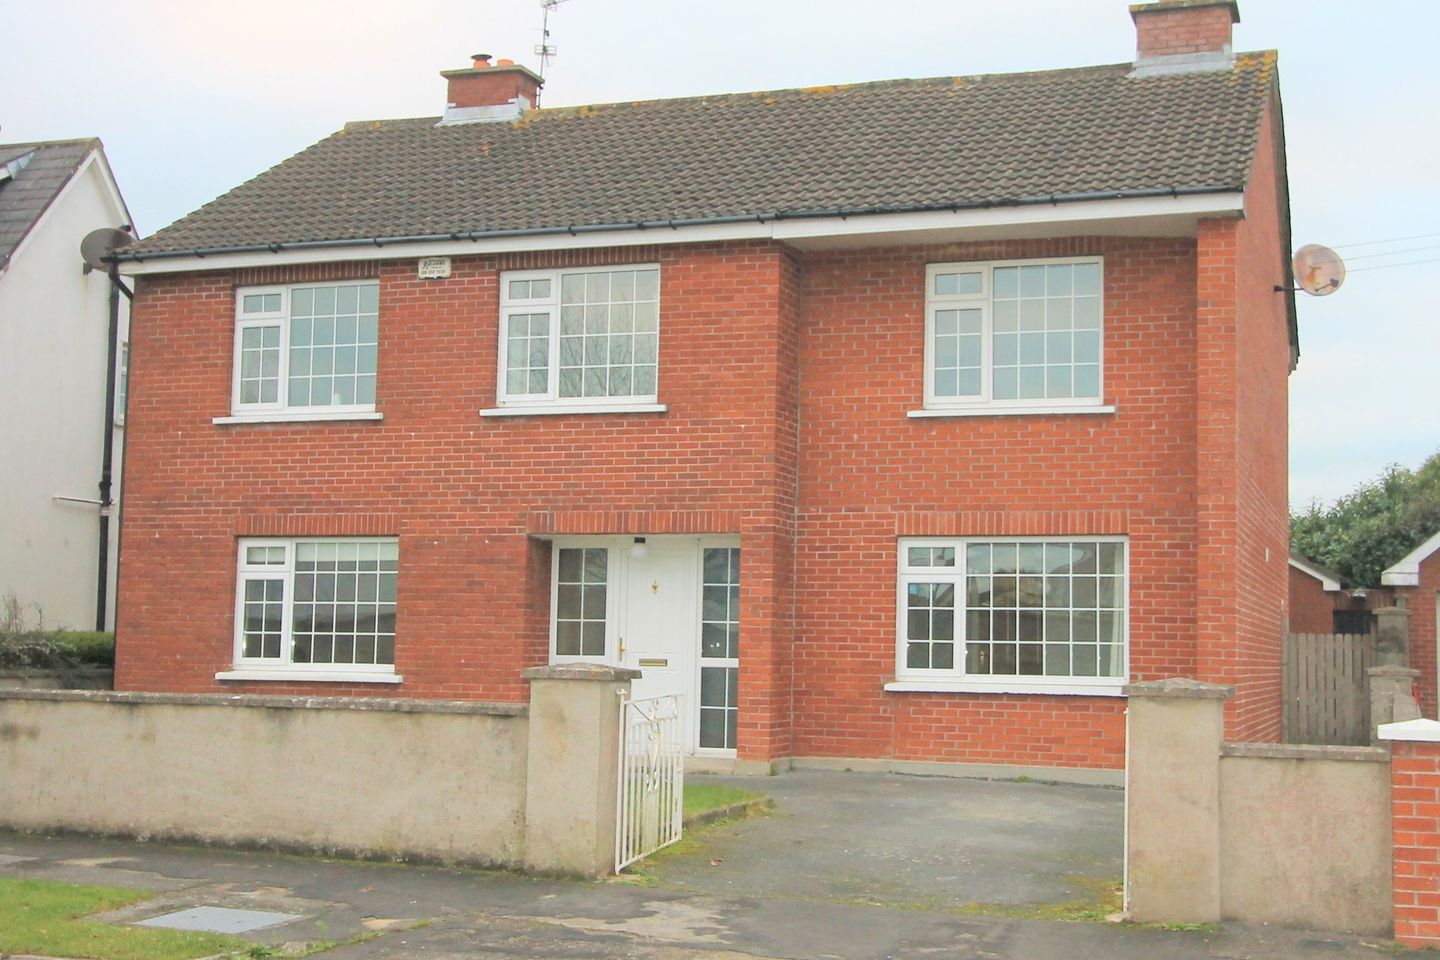 54 Willowmere Drive, Thurles, Co. Tipperary, E41X4K4